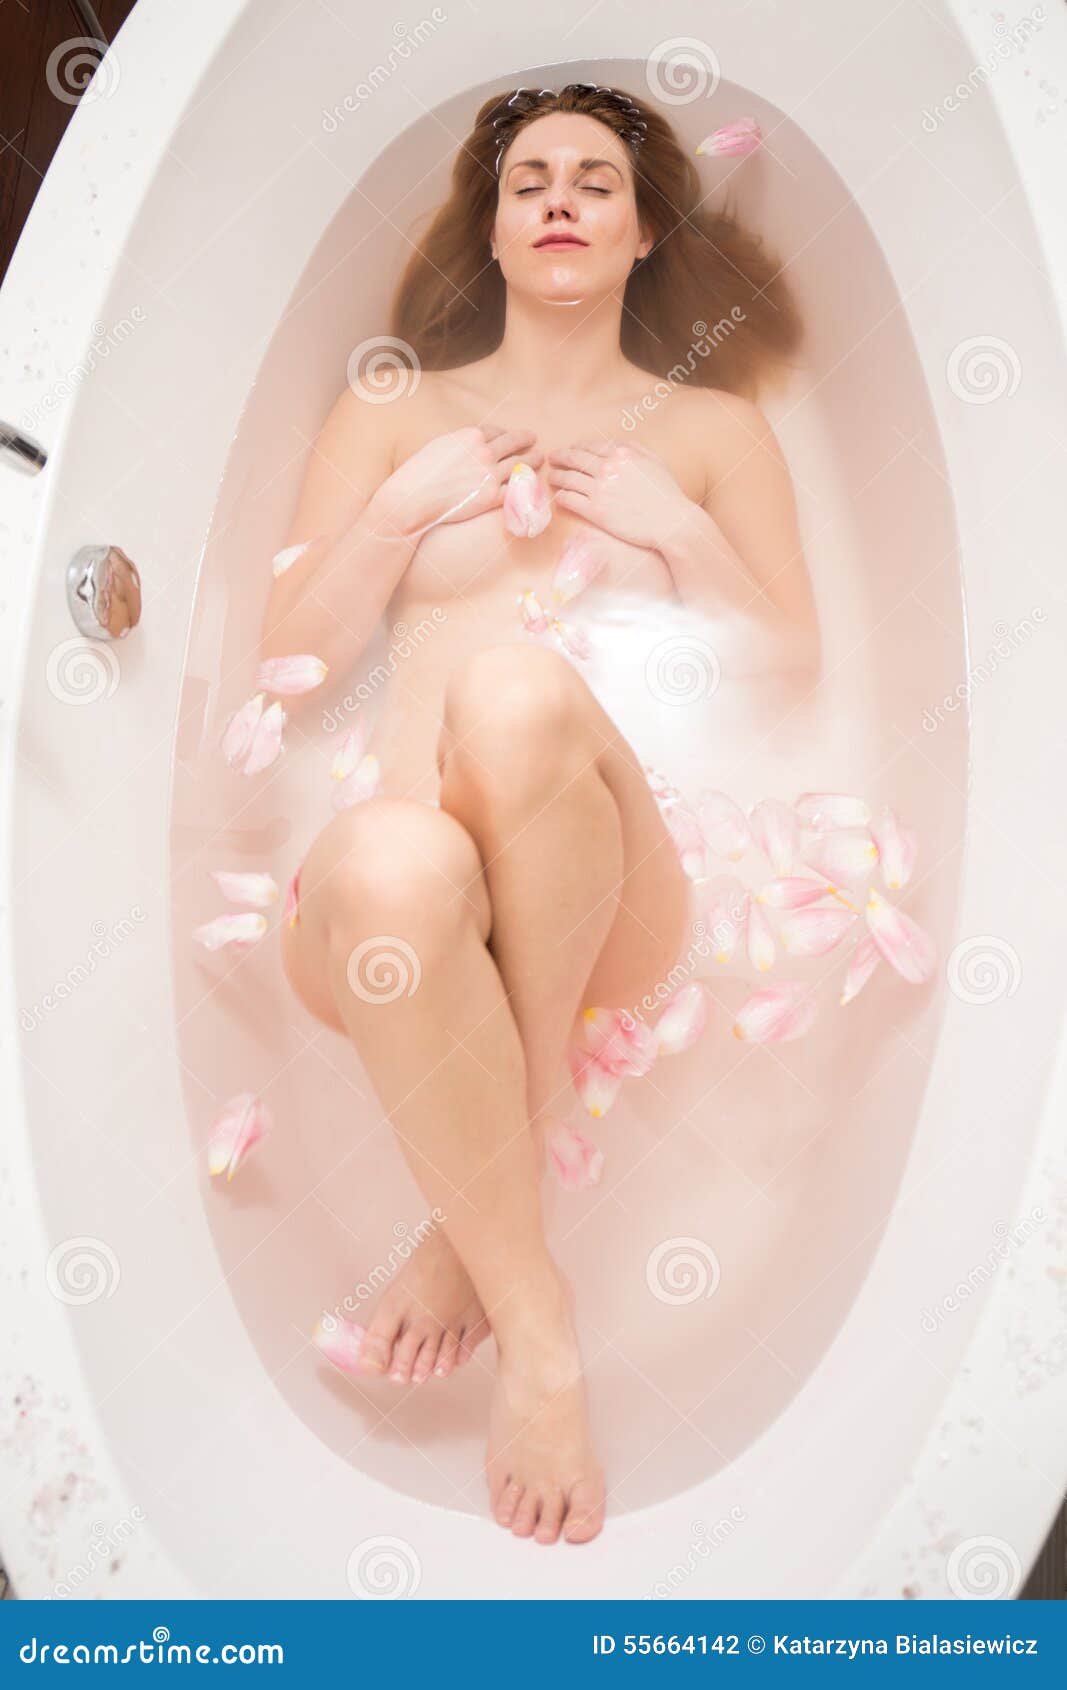 Women in the bath naked